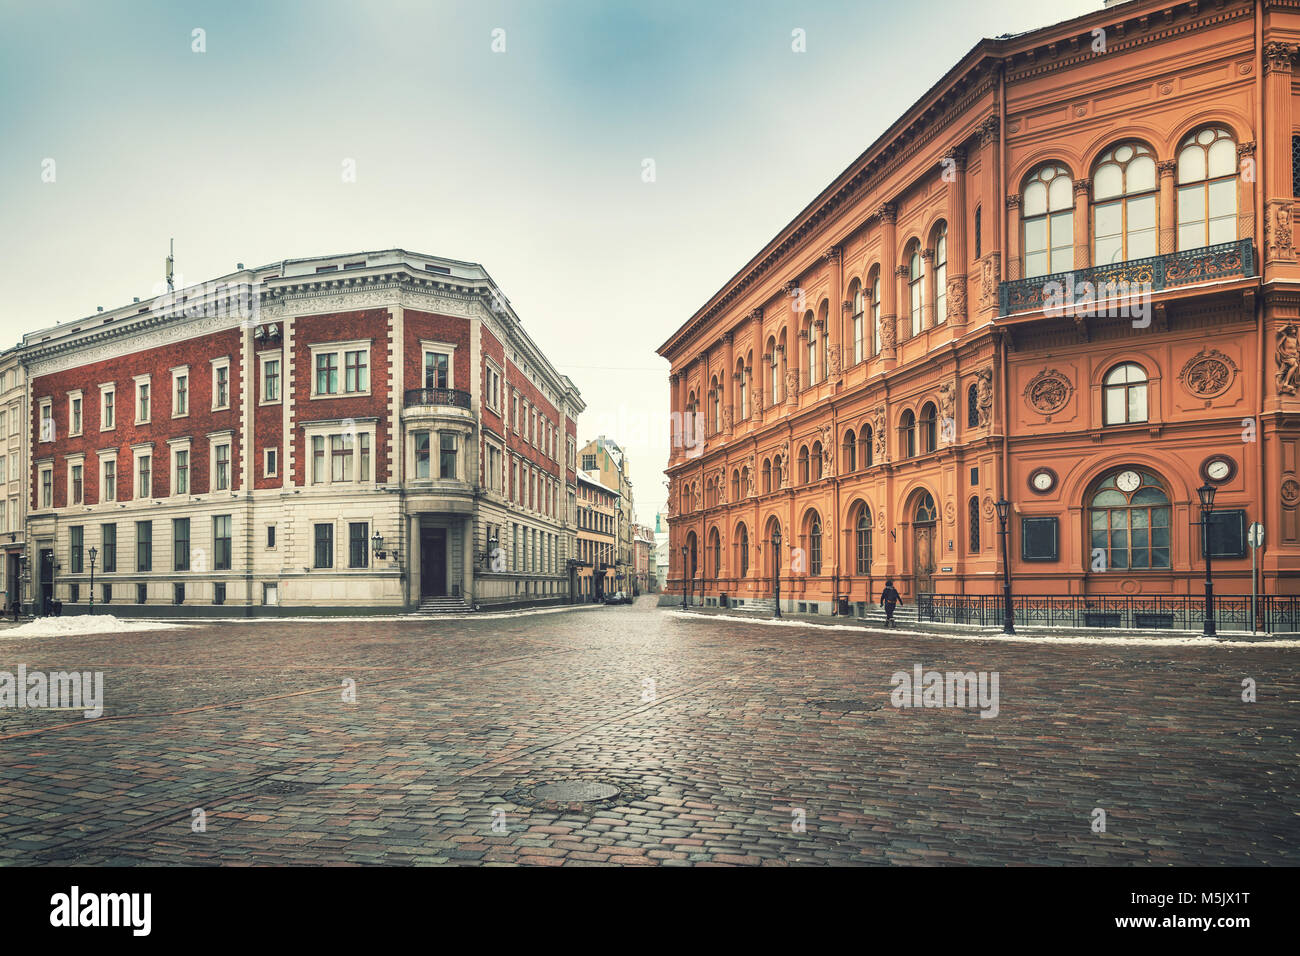 Riga old town - historical buildings at Dome square Stock Photo